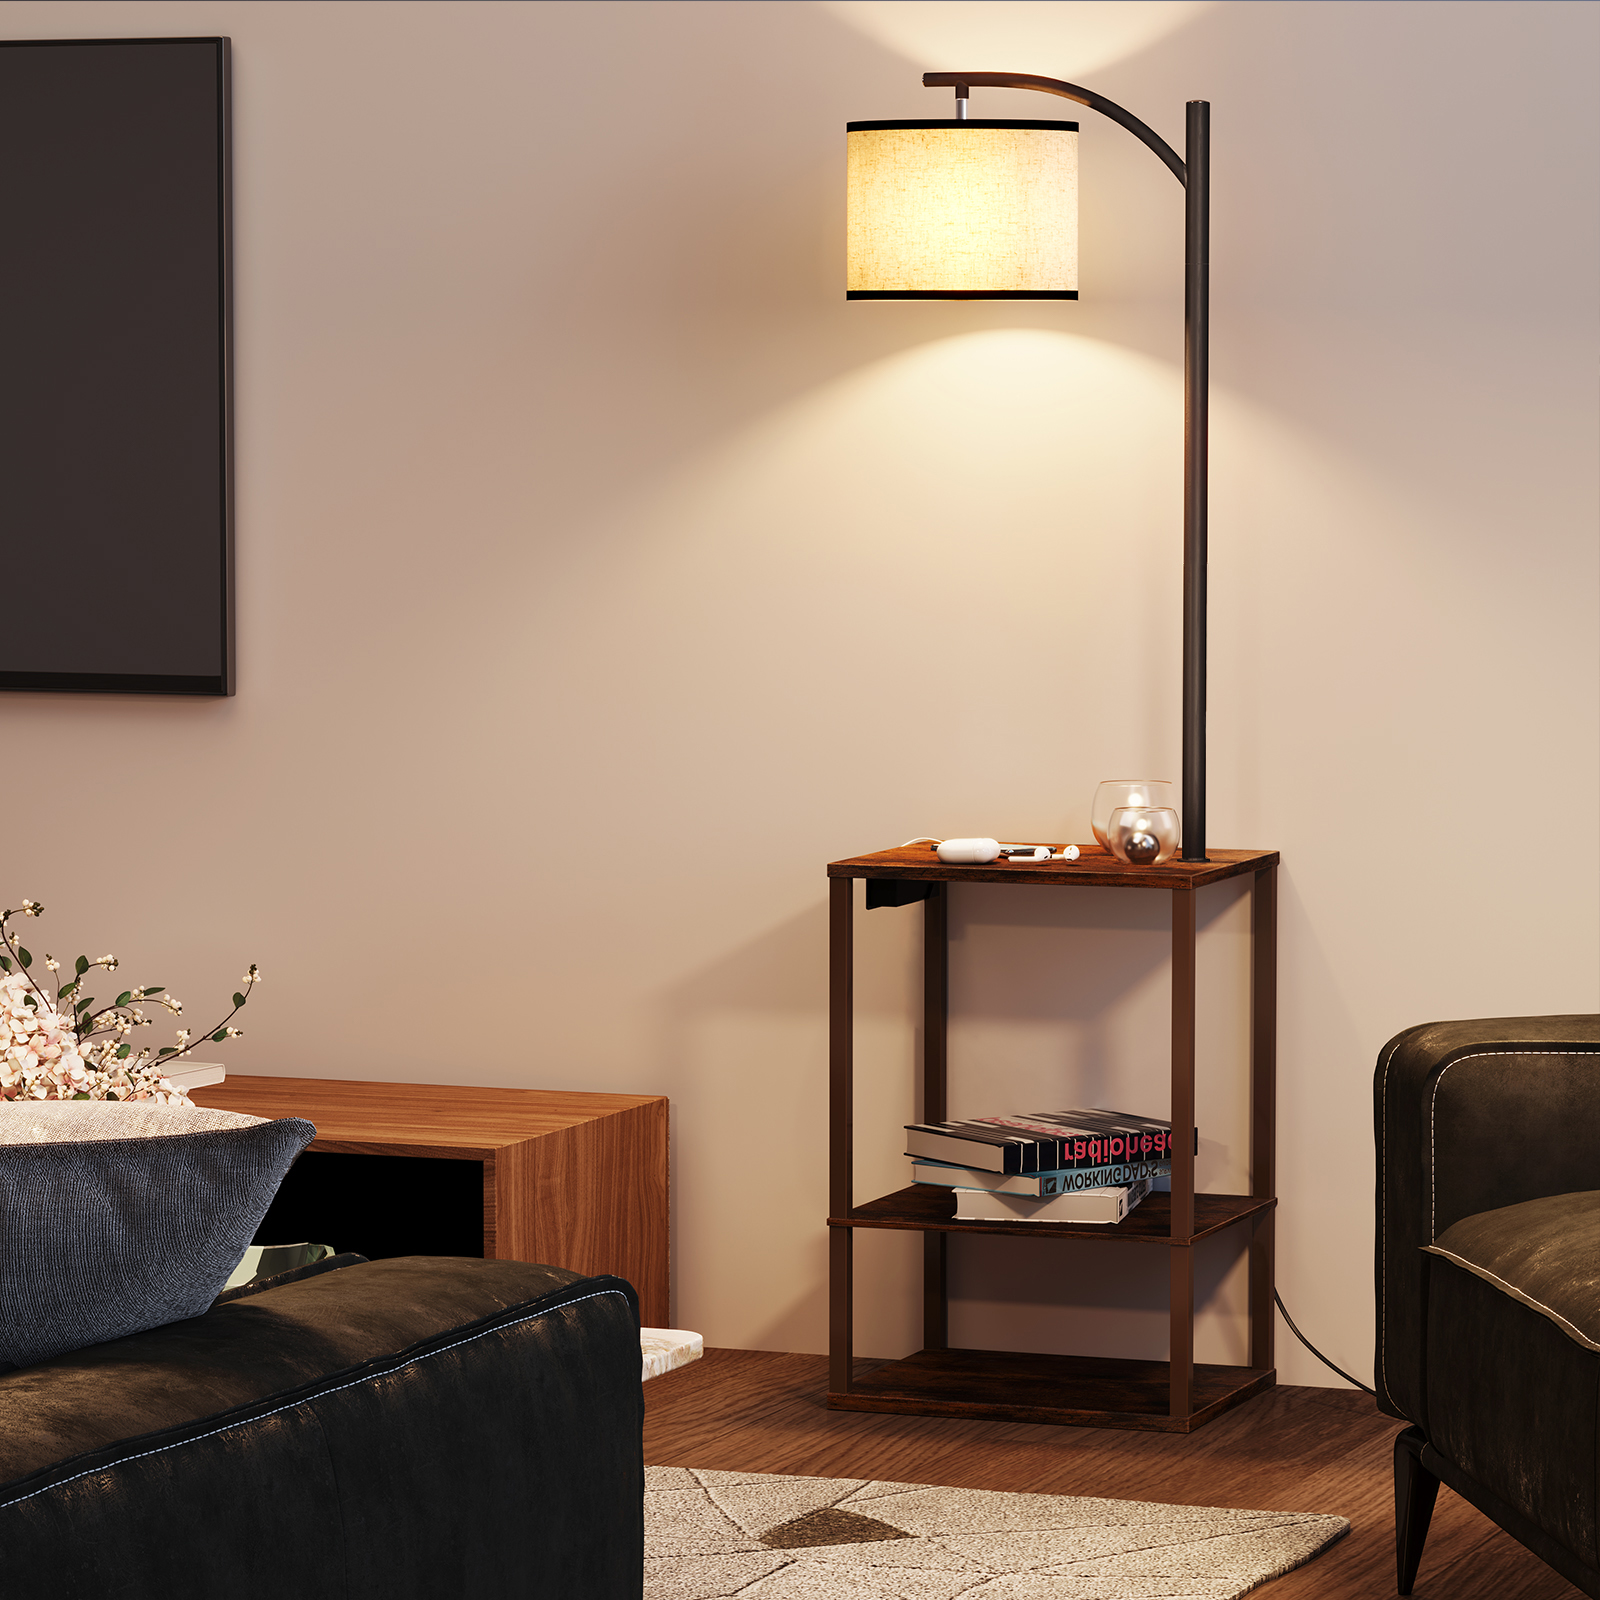 SUNMORY Floor Lamp with Table, Lamps for Living Room with USB Port, Attached End Table with Shelves, Brown - image 4 of 9